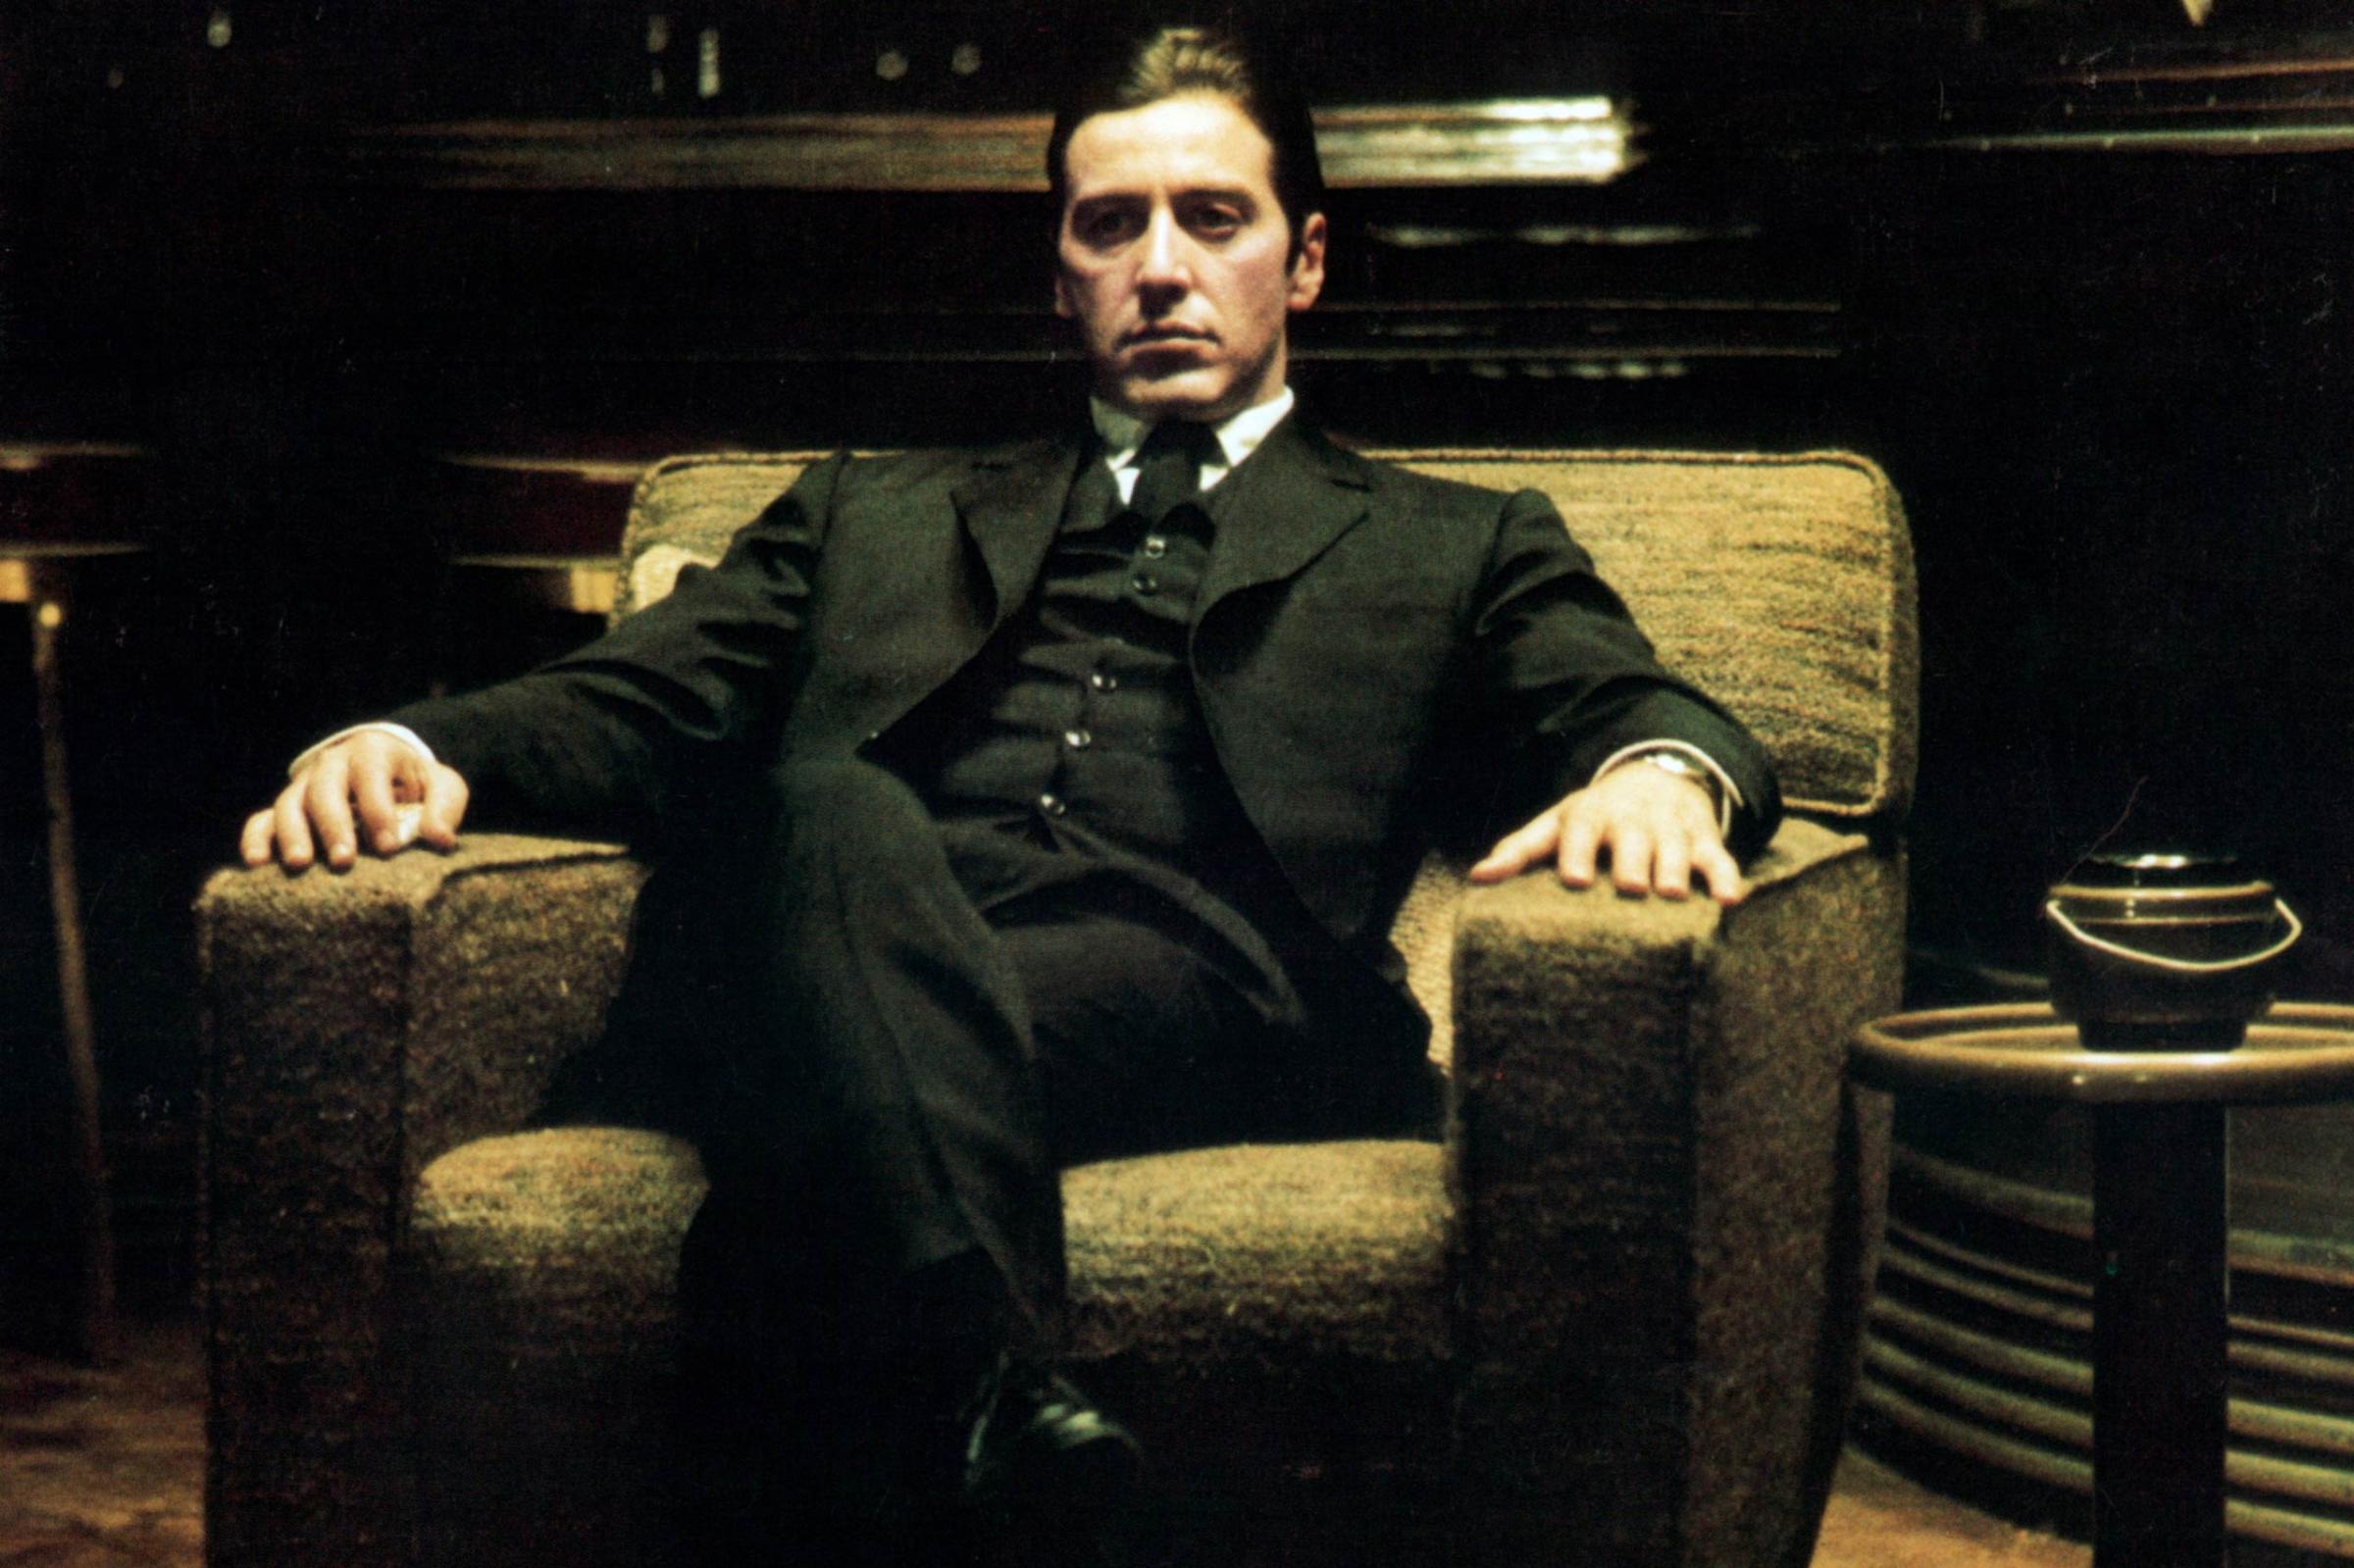 Al Pacino In 'The Godfather: Part II'Woody Allen And Mia Farrow In 'A Midsummer Night's Sex Comedy''